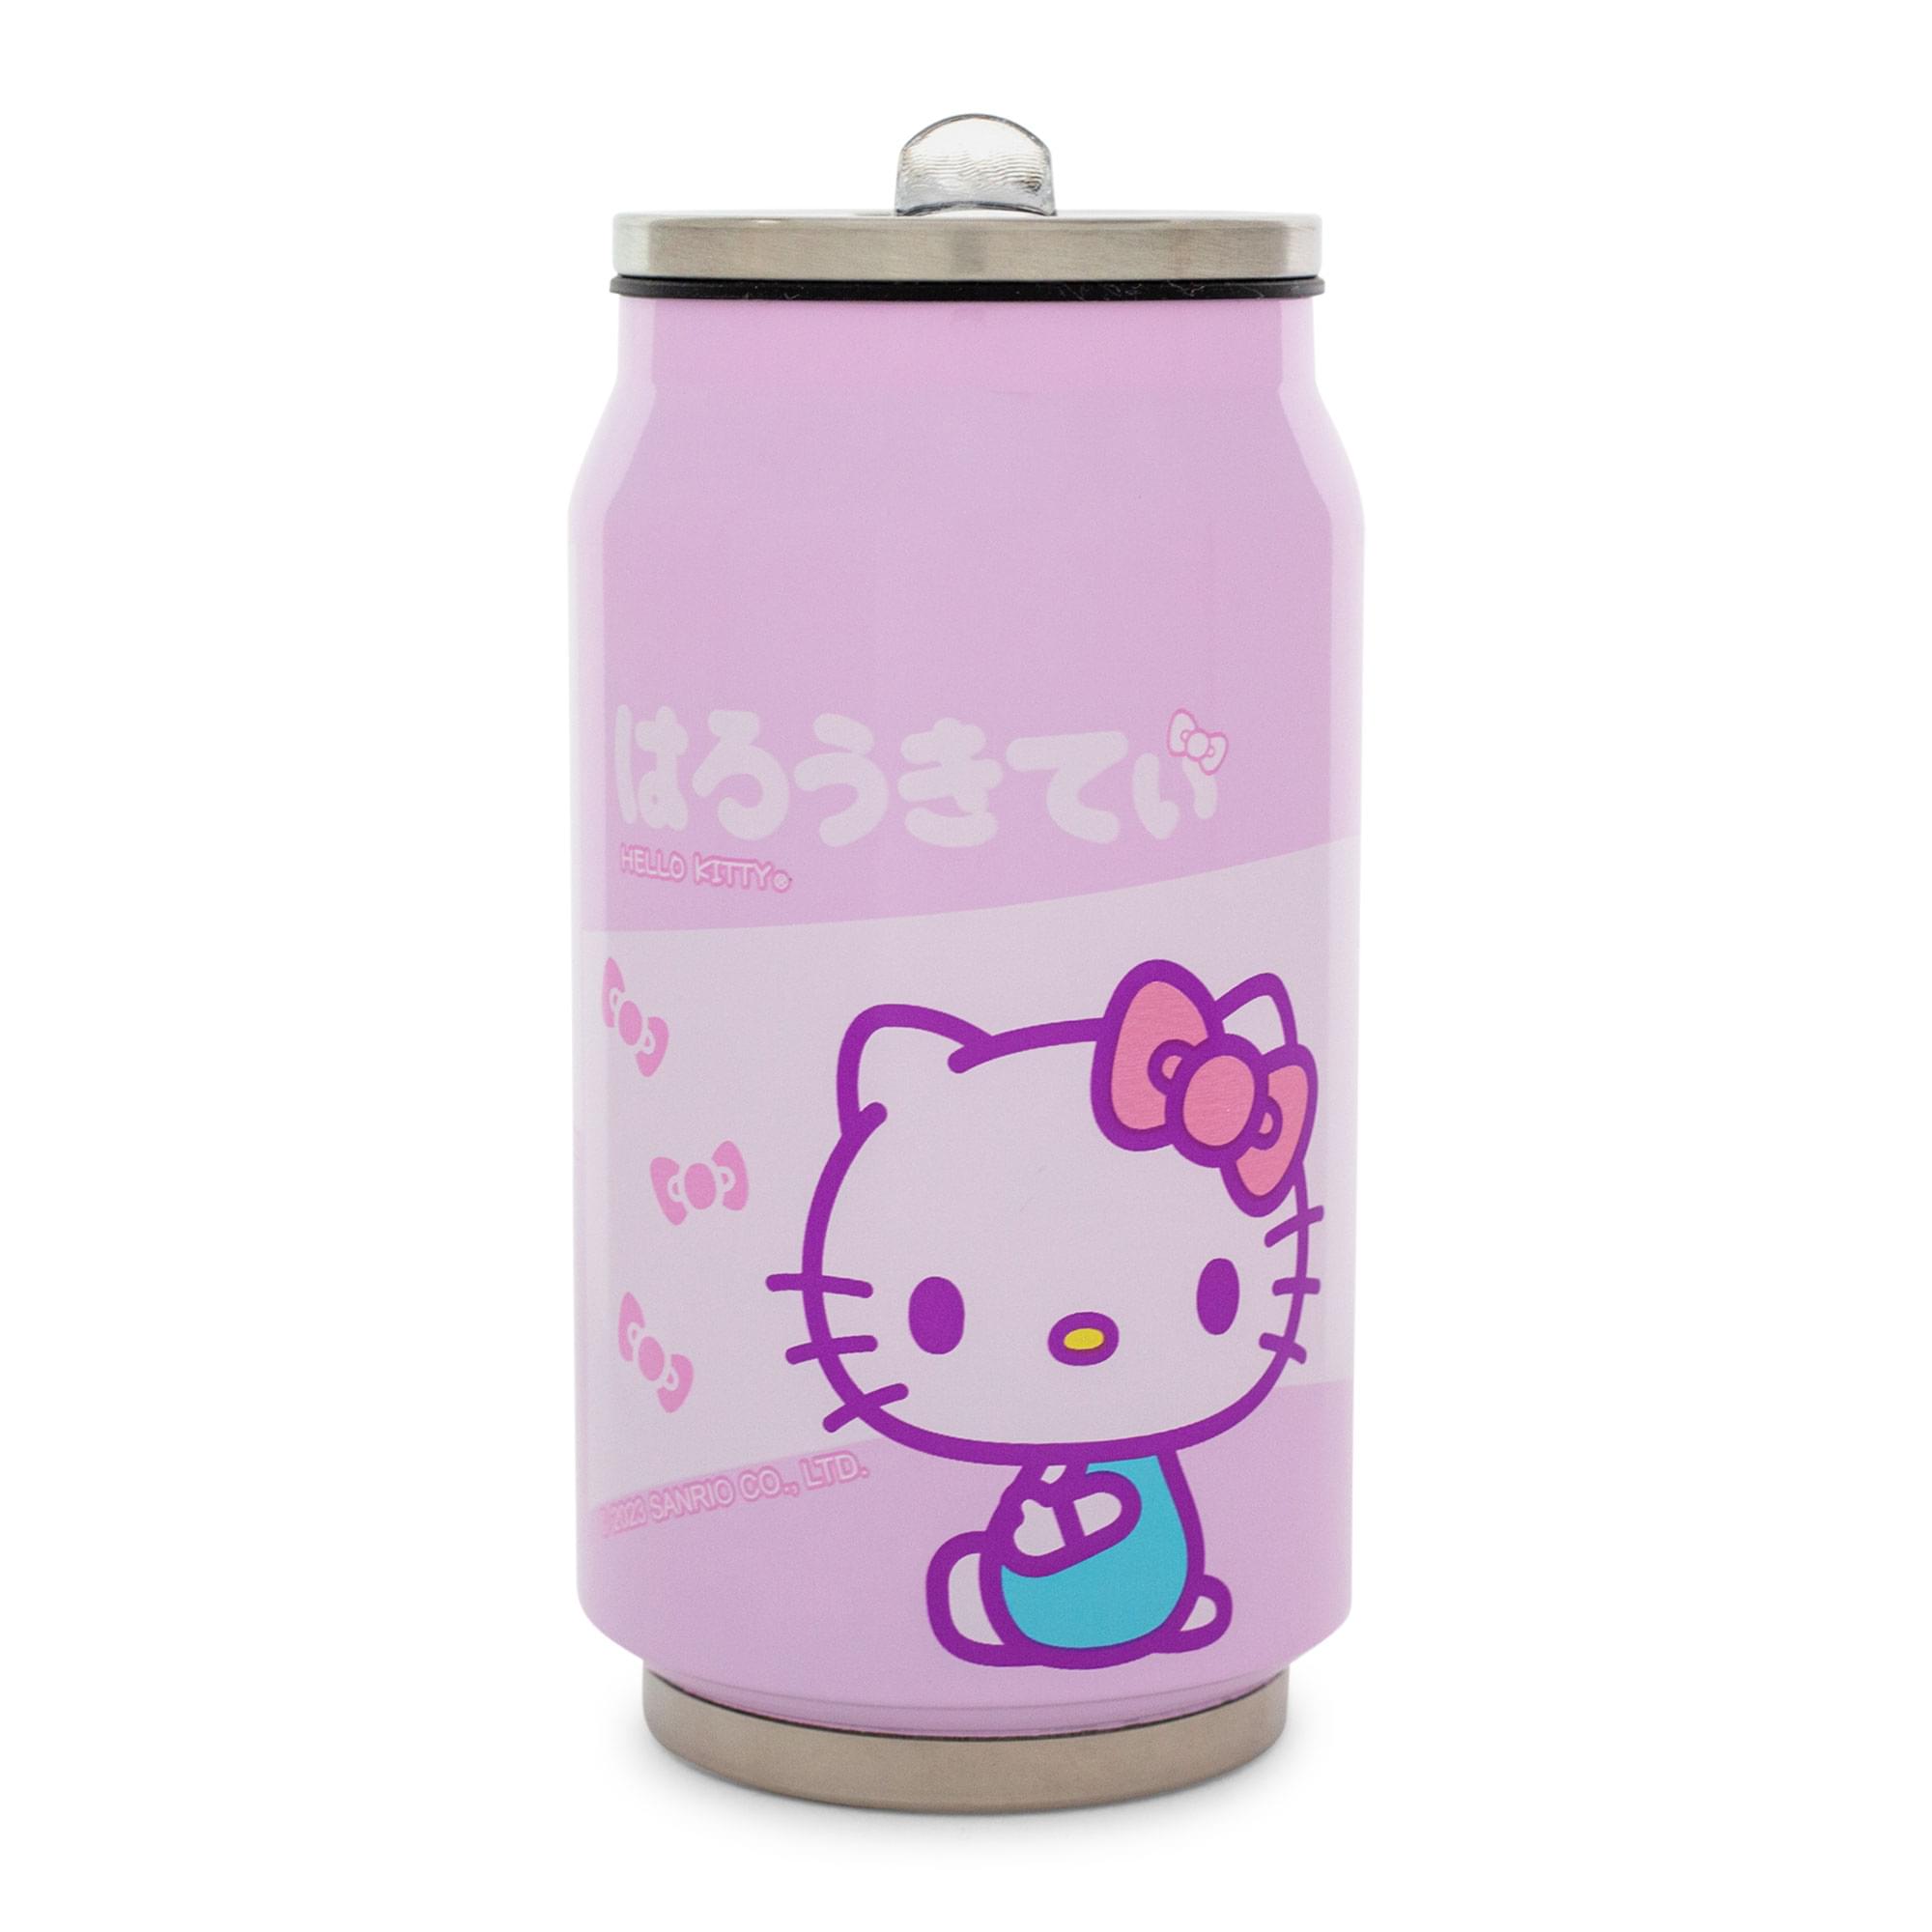 Hello Kitty Canister Set. Super cute & so sweet!. Store special treasures  in the adorable Hello Kitty Canisters …